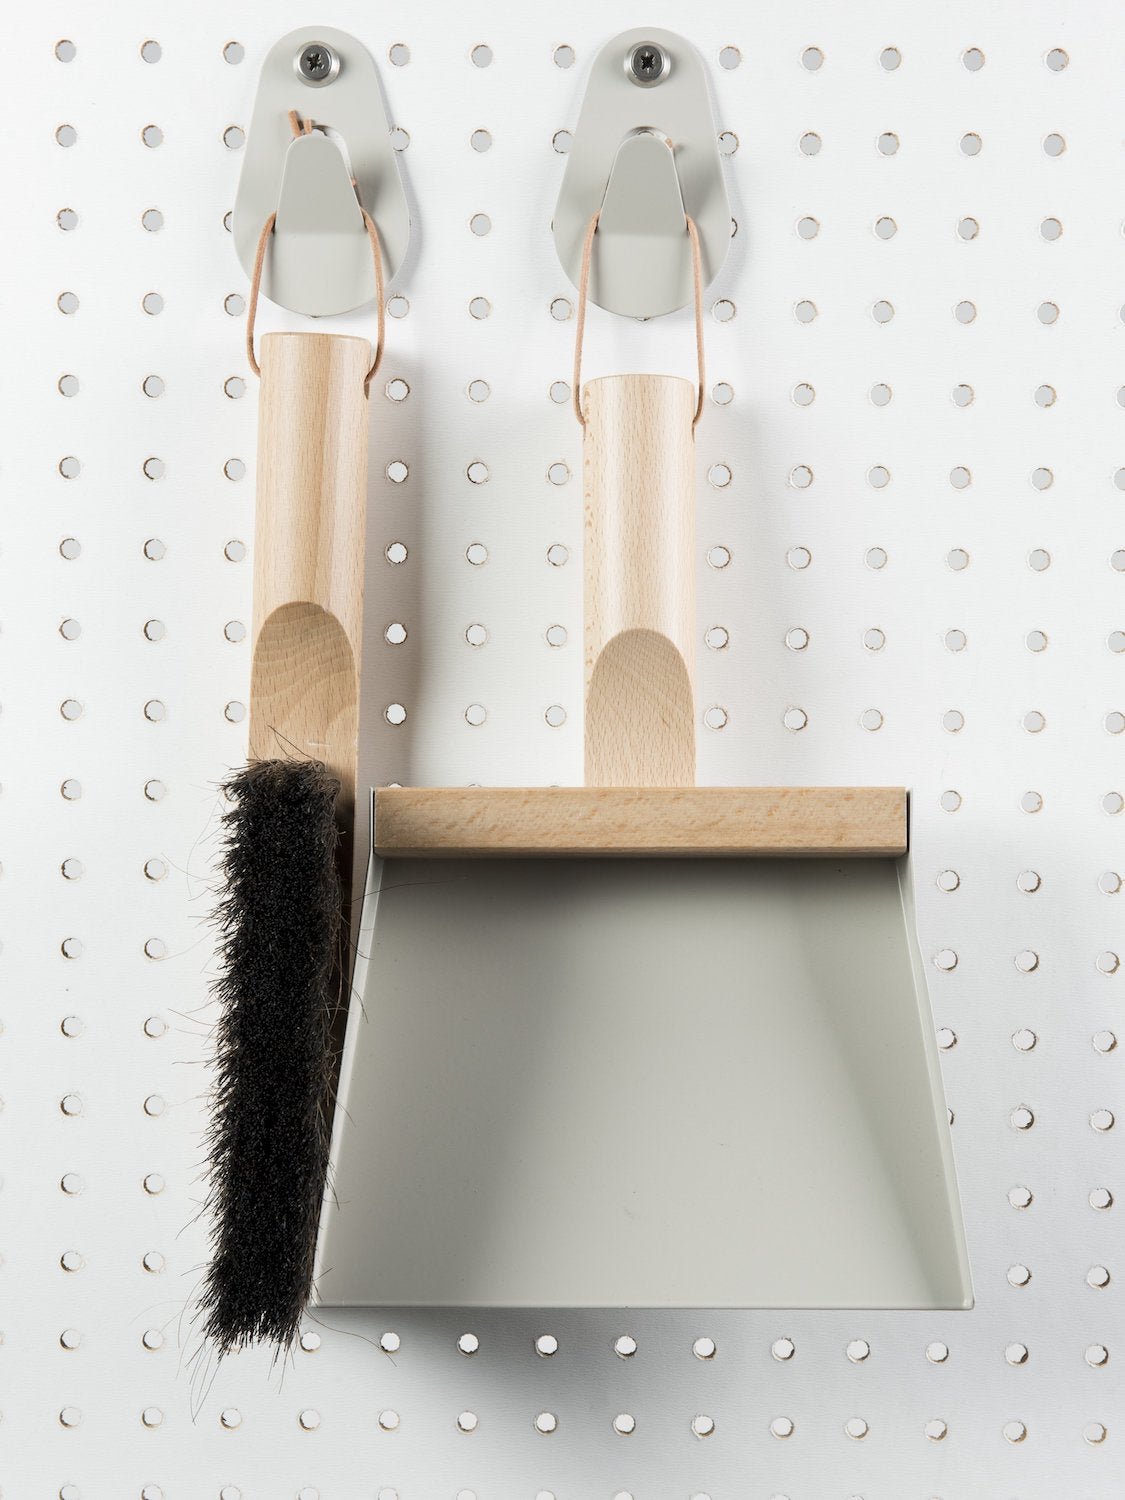 Andrée Jardin Mr. and Mrs. Clynk Grey Dustpan & Brush "Coffret" Gift Set with Wall Hooks